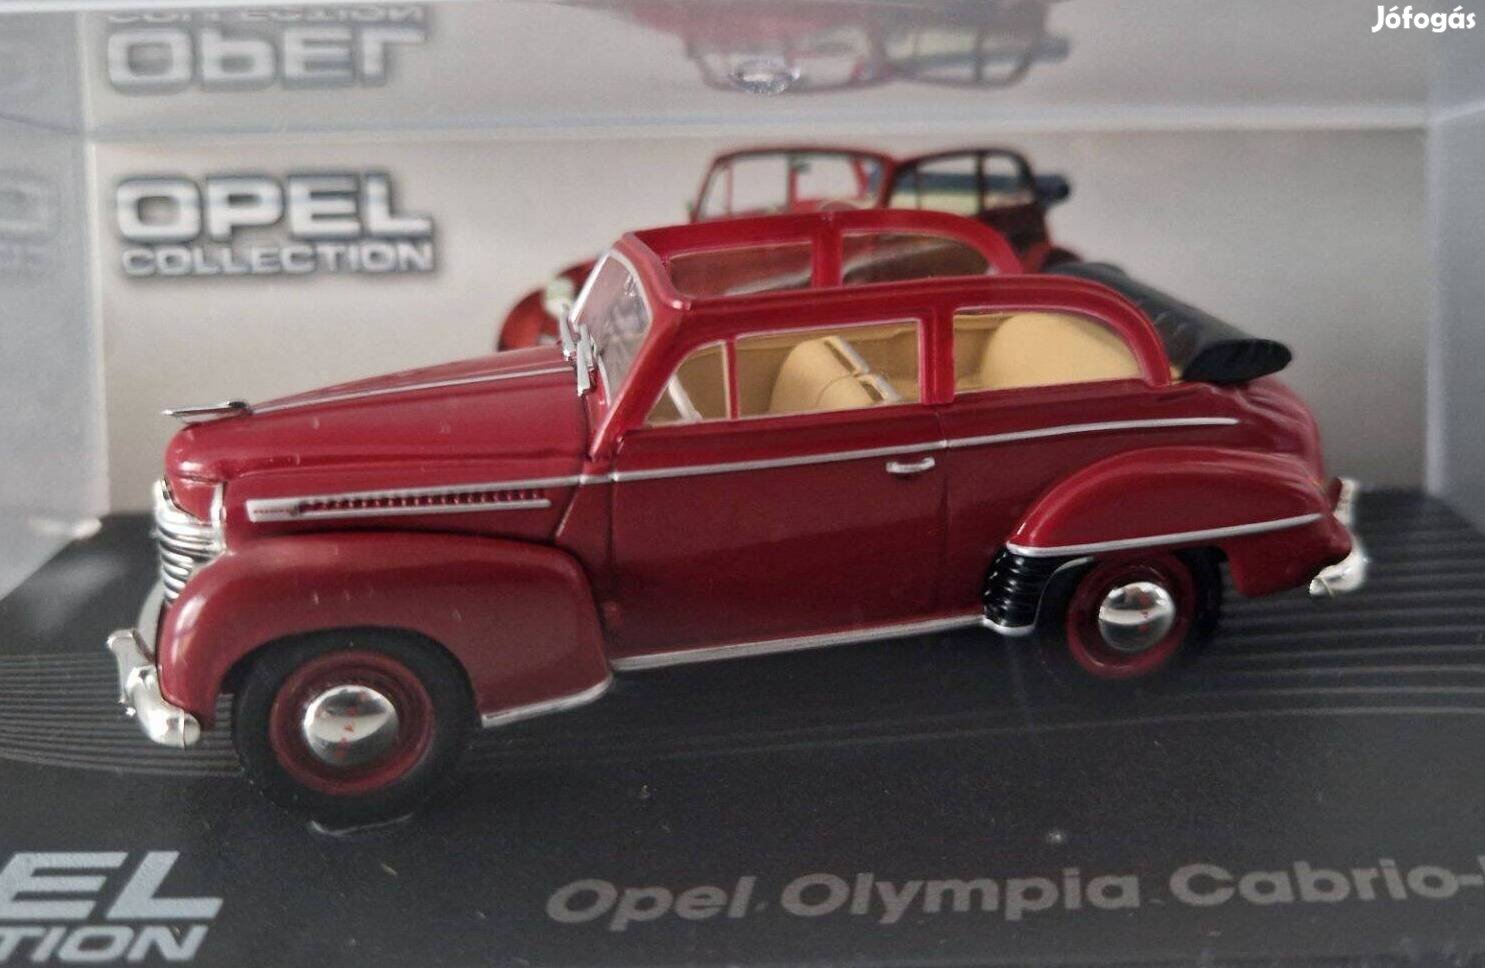 Opel Olympia Cabrio Limousine 1:43 1/43 modell Collection kisautó